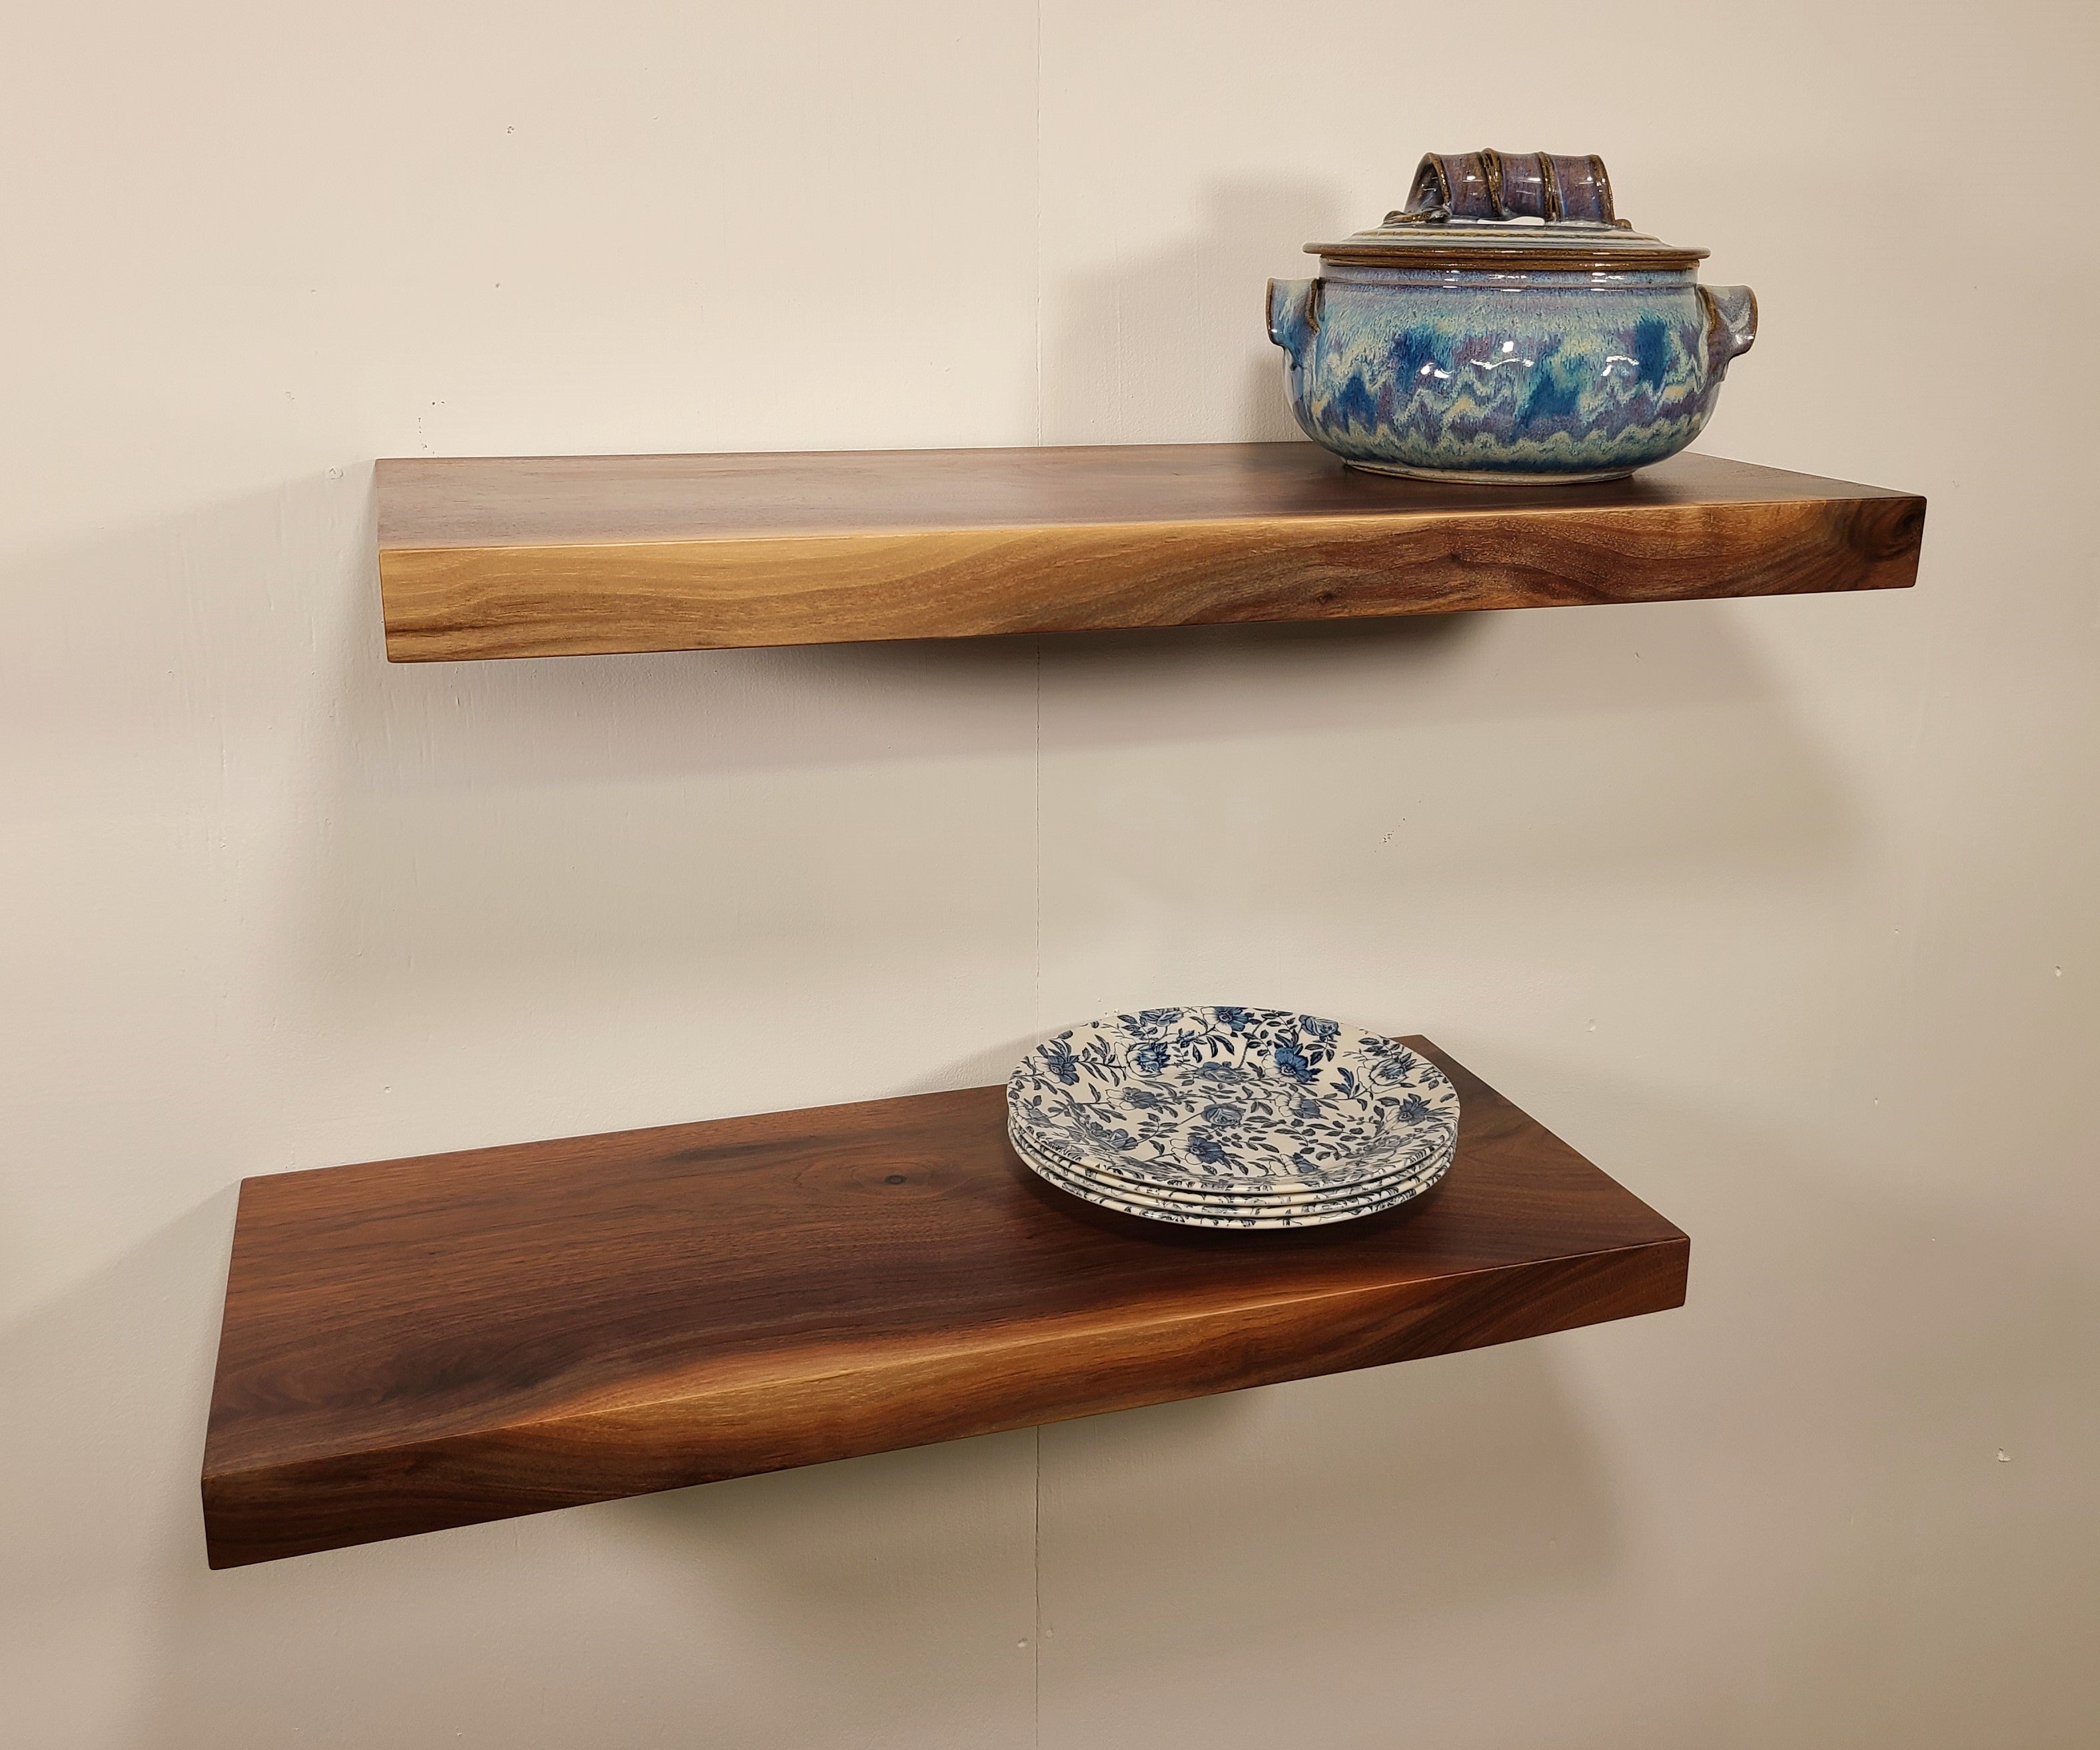 2 solid wood thick walnut floating shelves with a flat edge for a modern rustic look.  Made in Lancaster Pennsylvania by Zimboards.